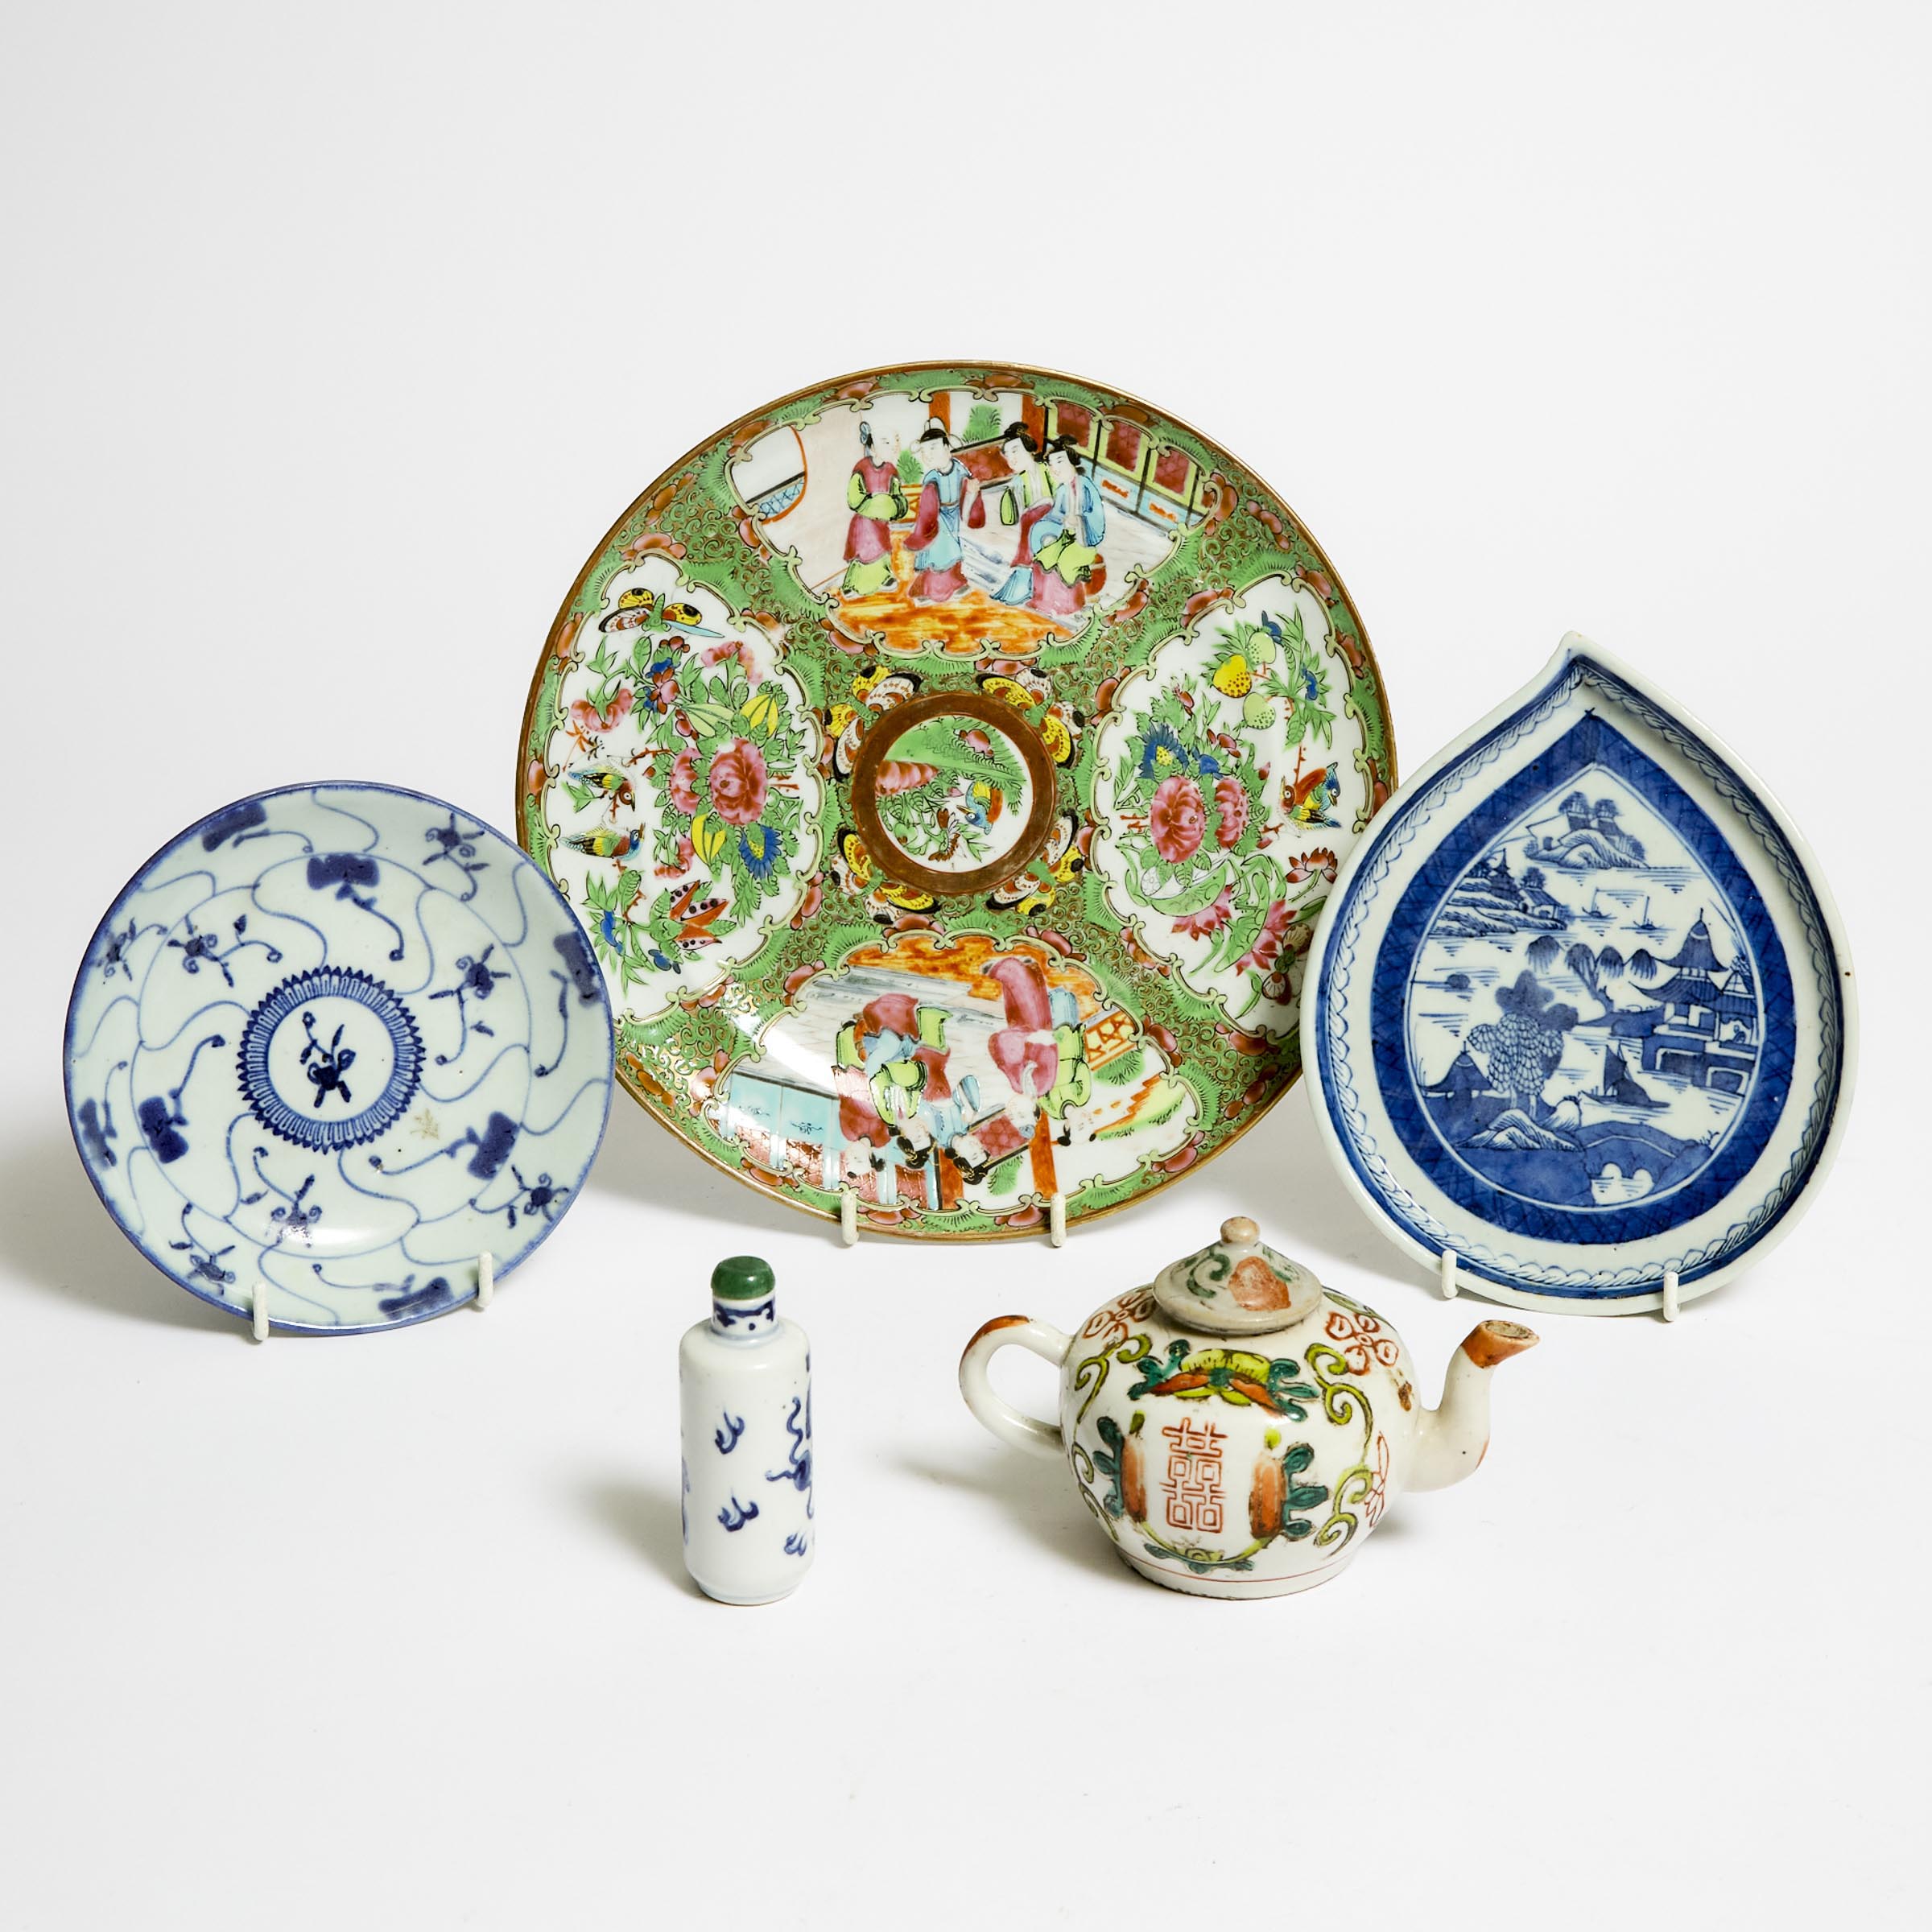 A Group of Five Chinese Porcelain Wares, 18th/19th Century